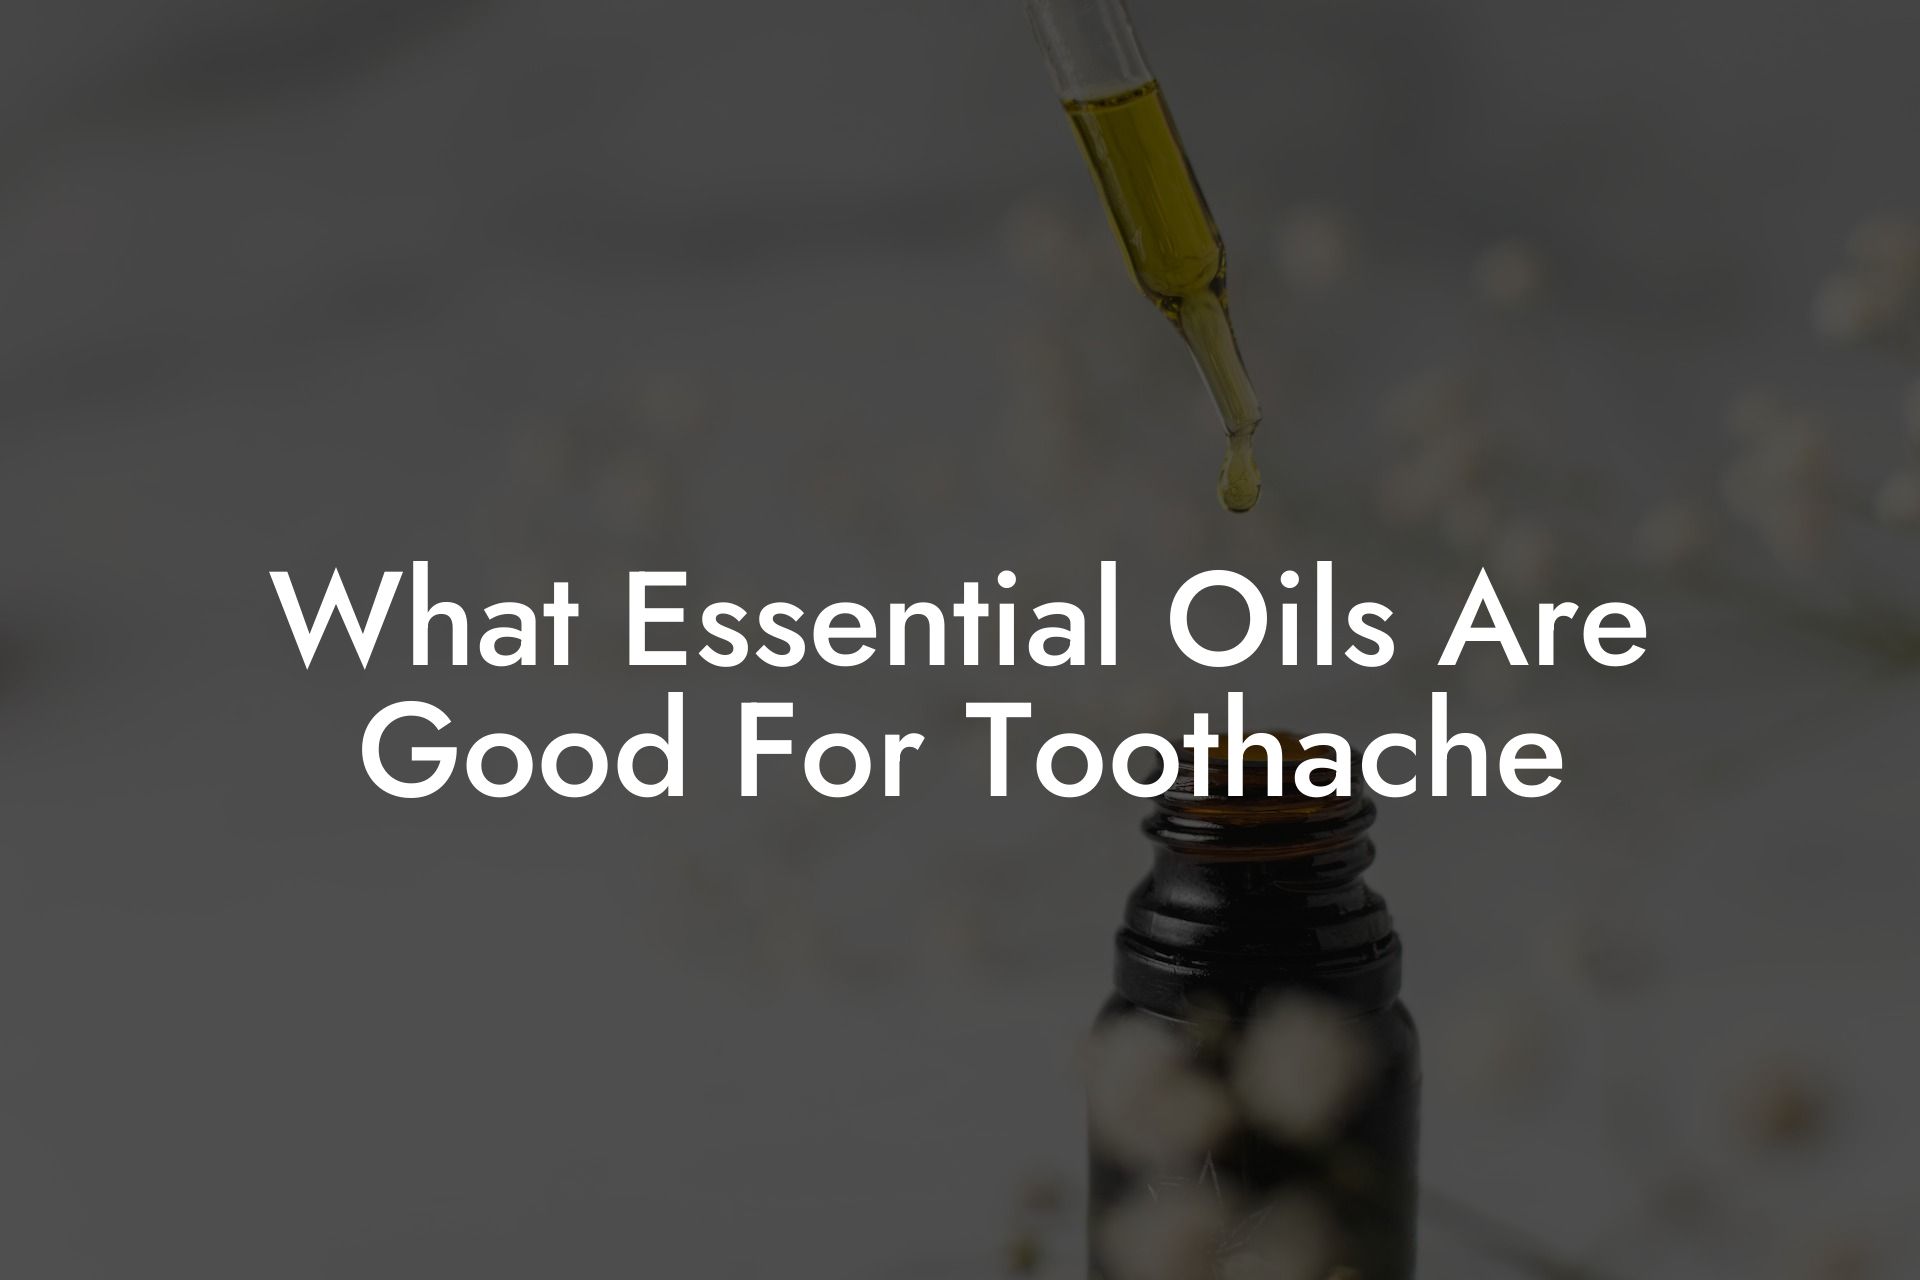 What Essential Oils Are Good For Toothache